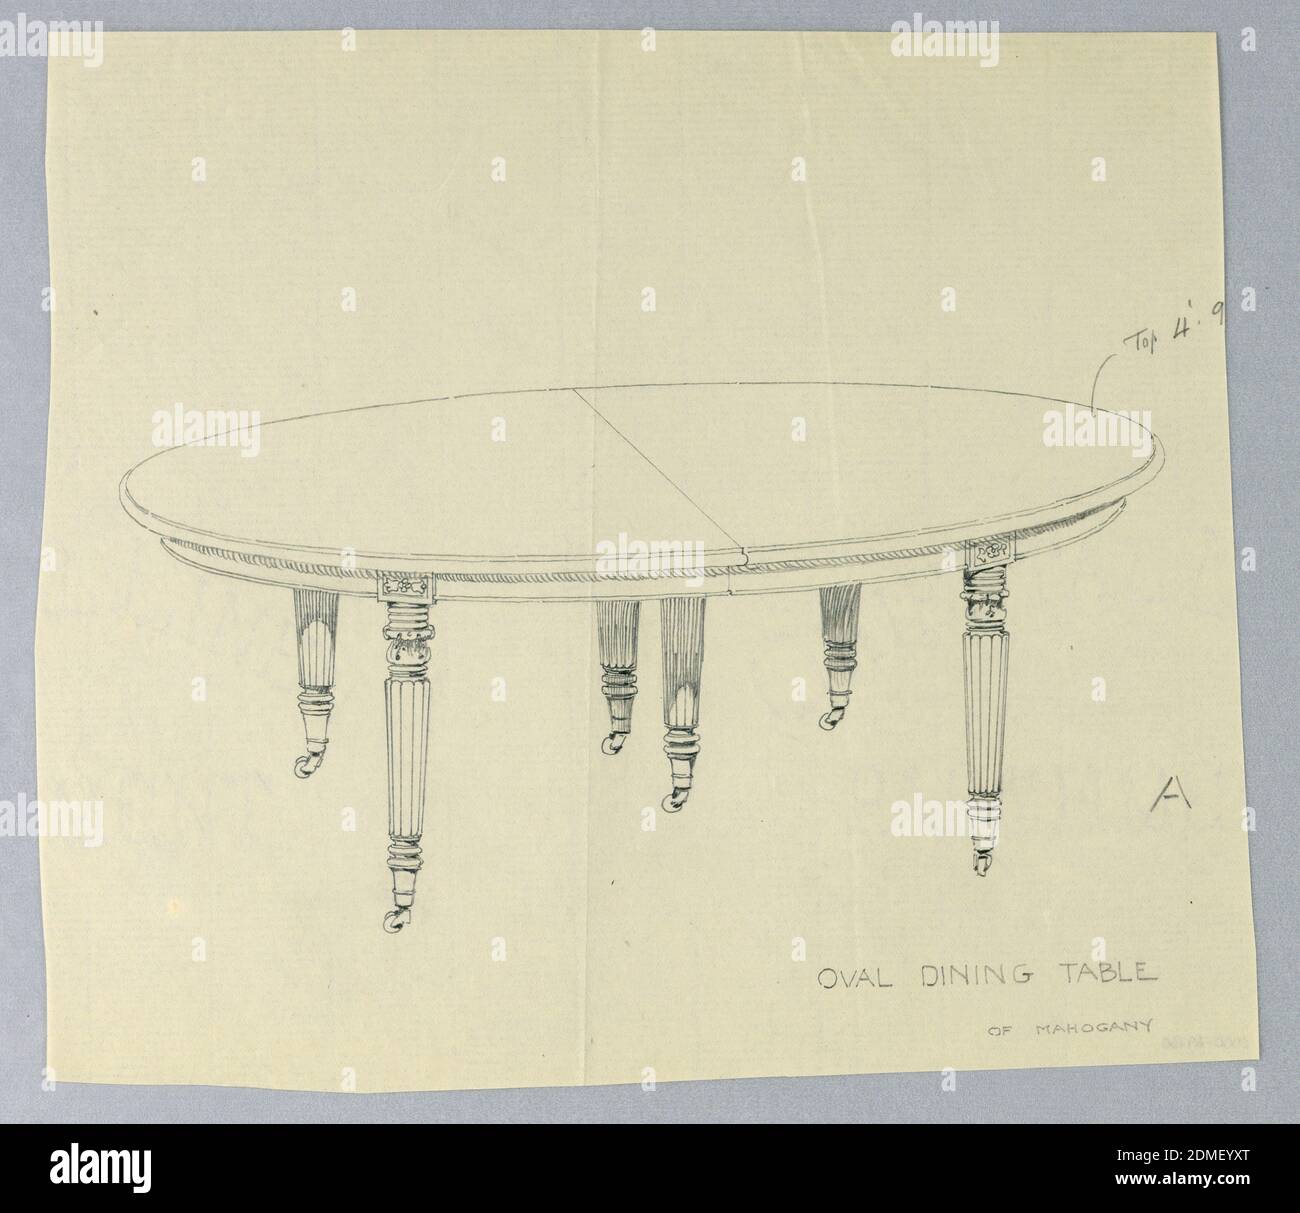 Design for an Oval Dining Table 'A' of Mahogany, A.N. Davenport Co., Graphite on thin cream paper, Oval molded top with dividing stretcher running across center, raised on 6 carved, turned and fluted tapering legs on casters; smll rectangular carved inlaid plaques on table top., 1900–05, furniture, Drawing Stock Photo